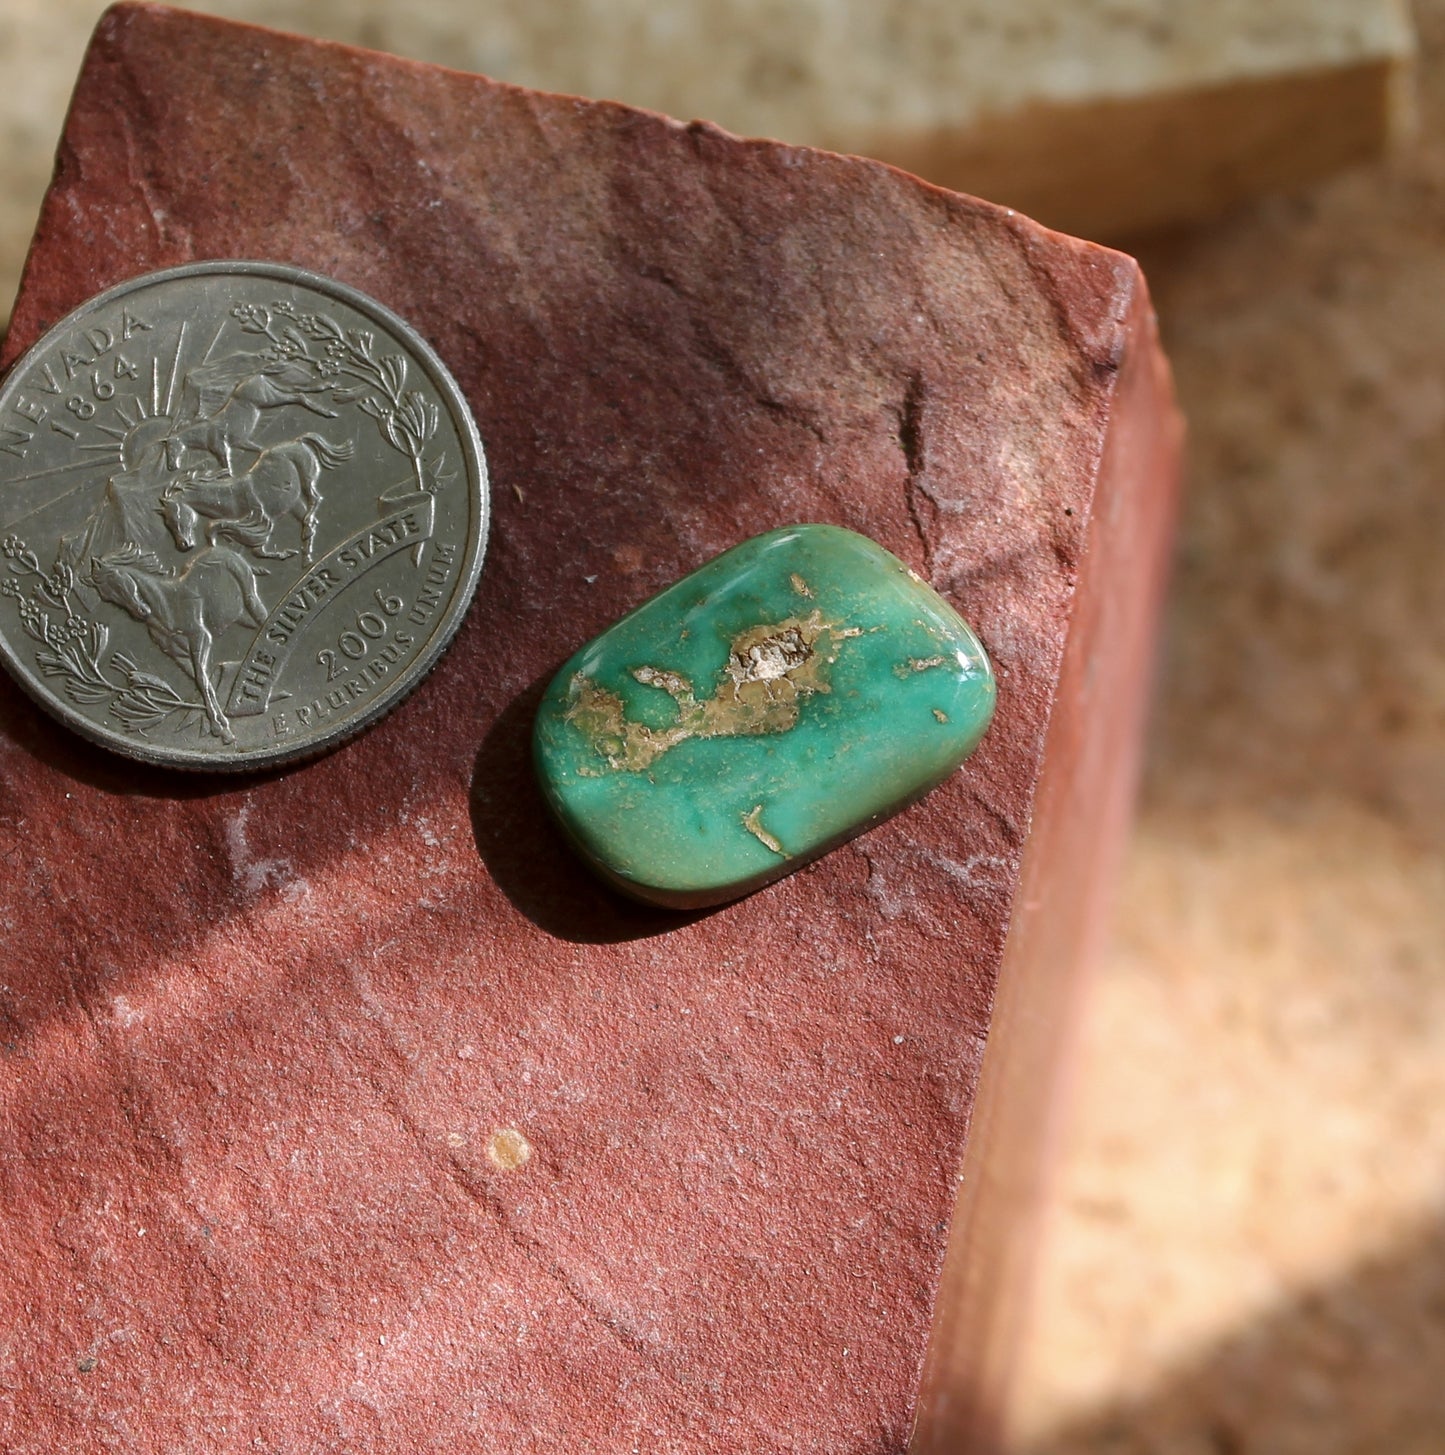 10 carat green Stone Mountain Turquoise cabochon with brown inclusions